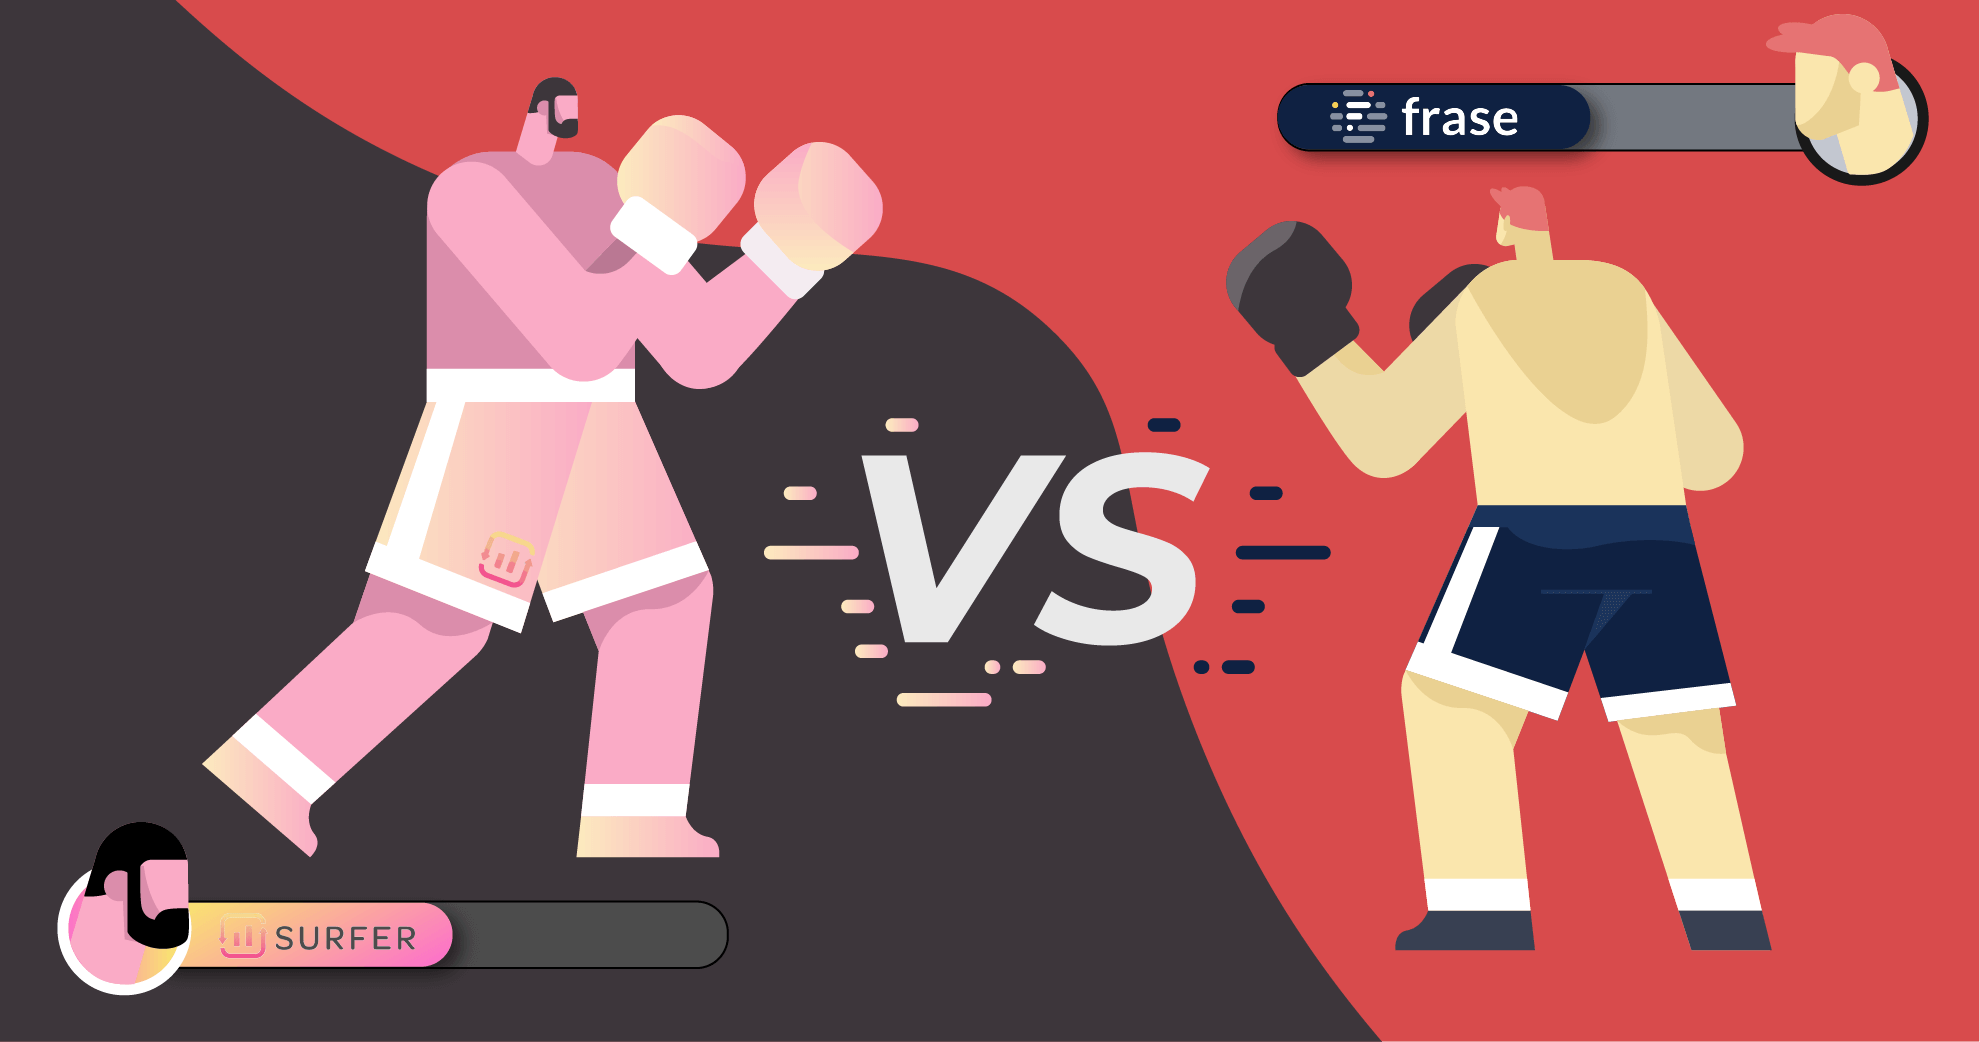 Surfer SEO vs Frase: Which One Should You Choose?